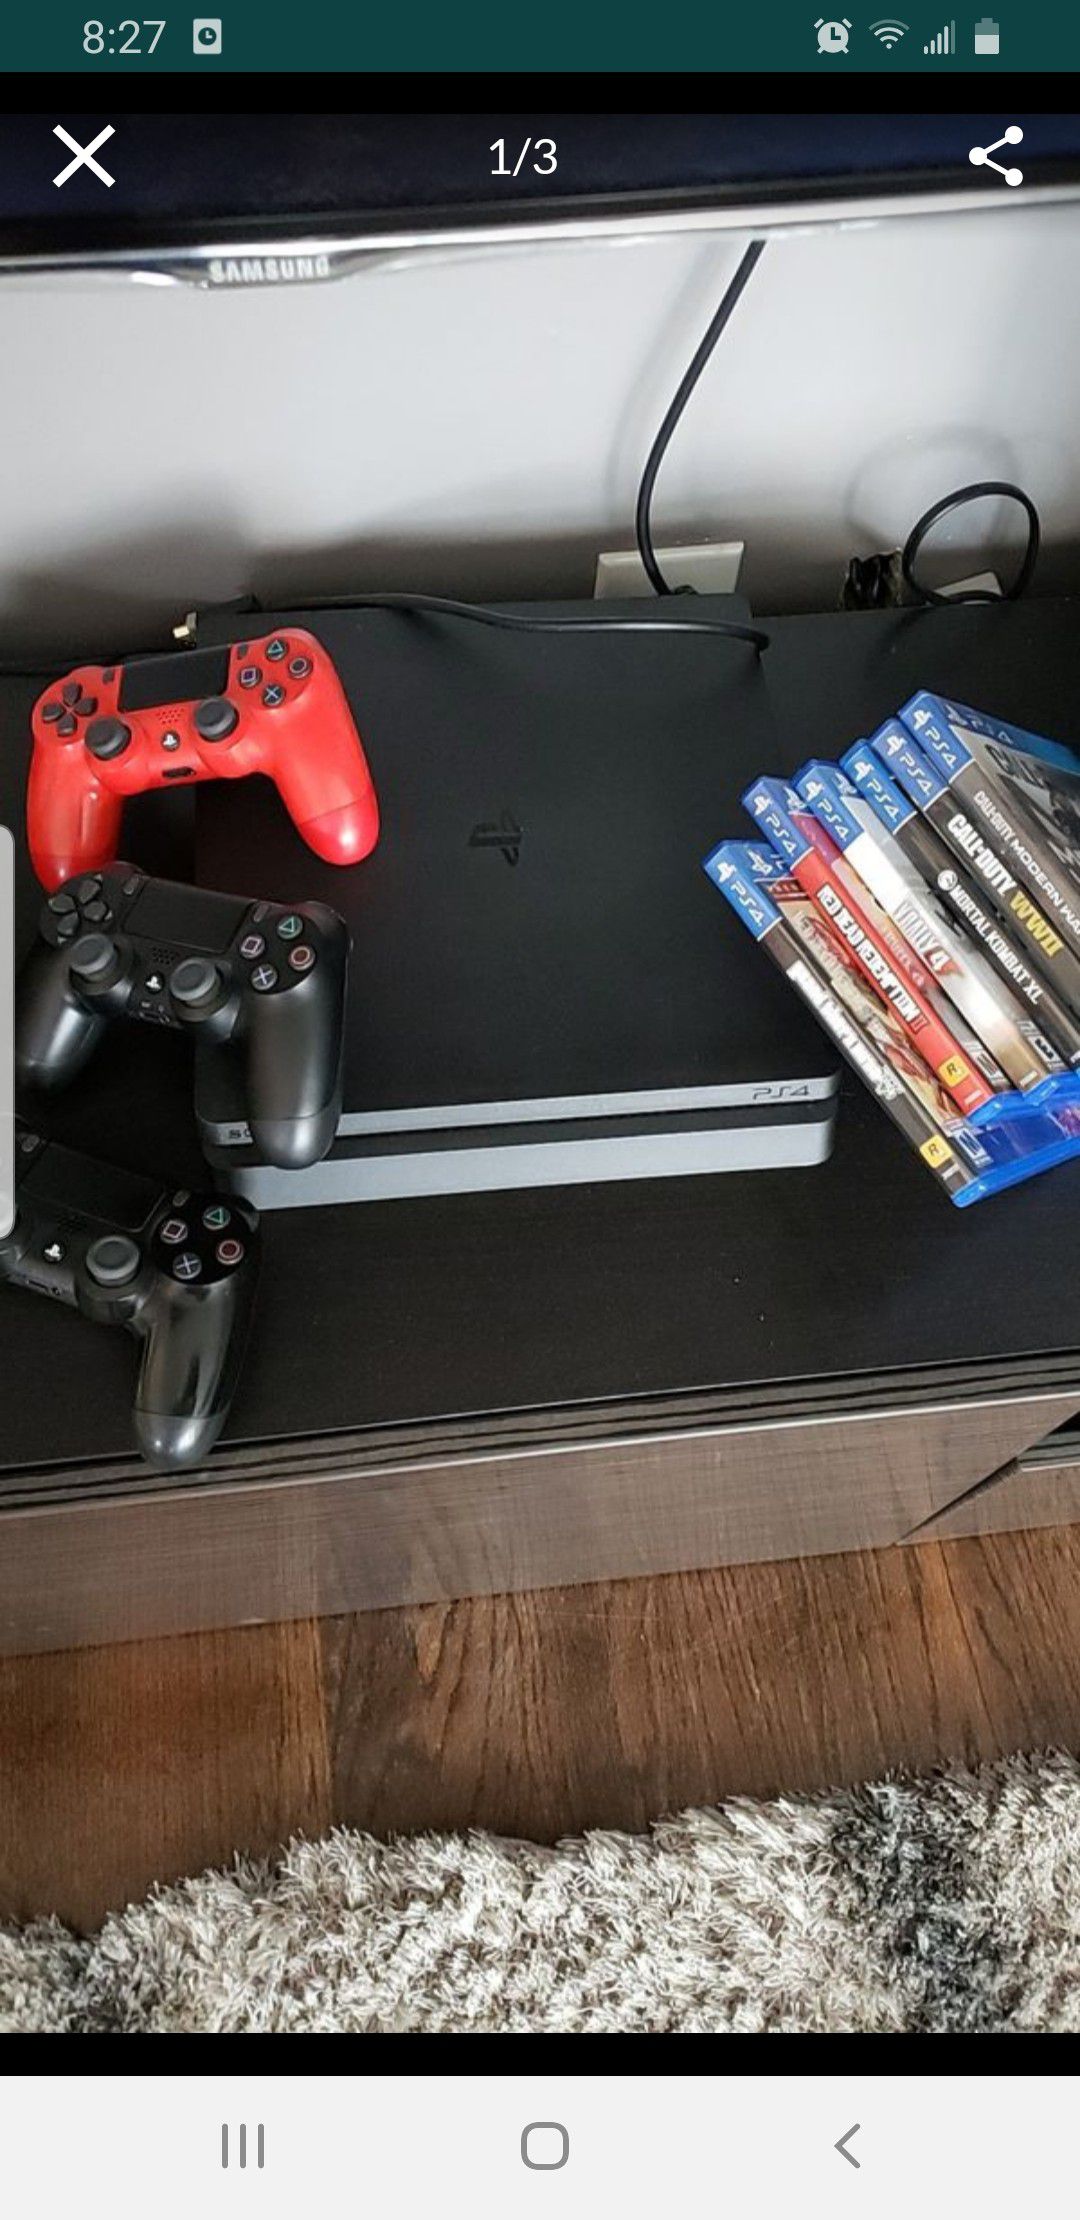 Ps4 1tb with games and controls